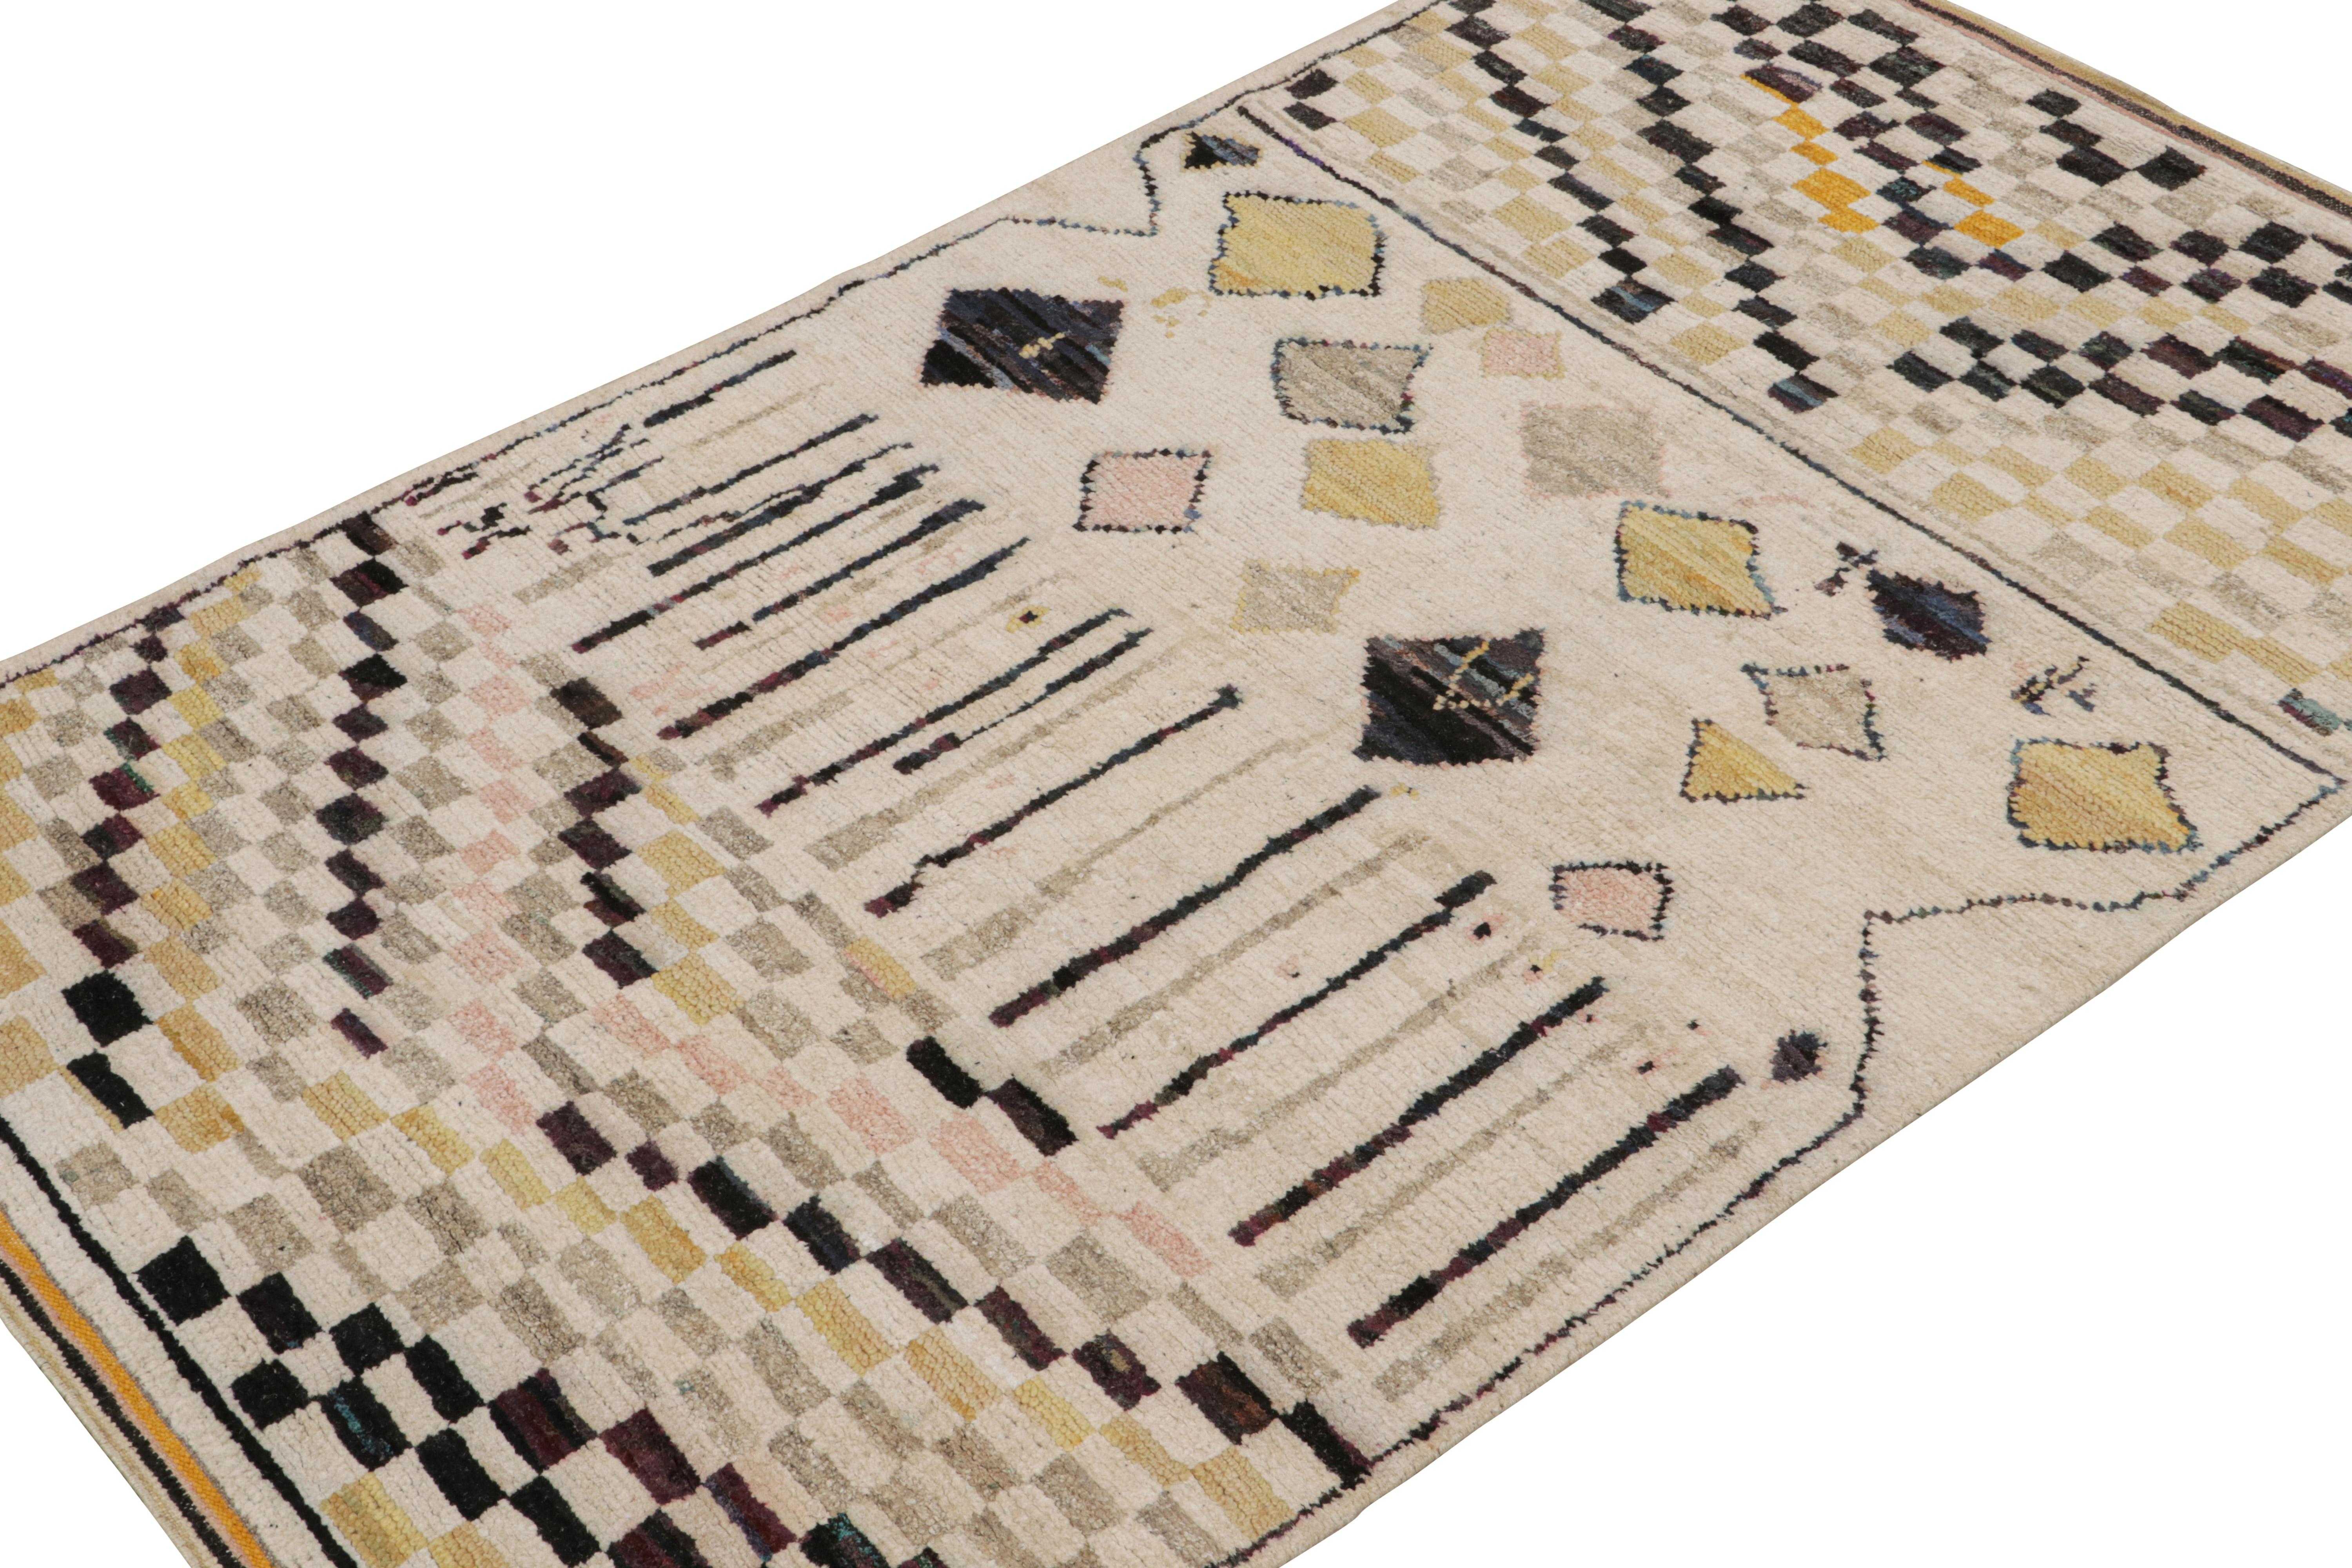 Hand-knotted in wool, silk and cotton, this 3x10 rug is a new addition to the Moroccan rug collection by Rug & Kilim. 

On the Design

This designs represent a modern take on the Berber primitivist style, with multicolor geometric patterns on a